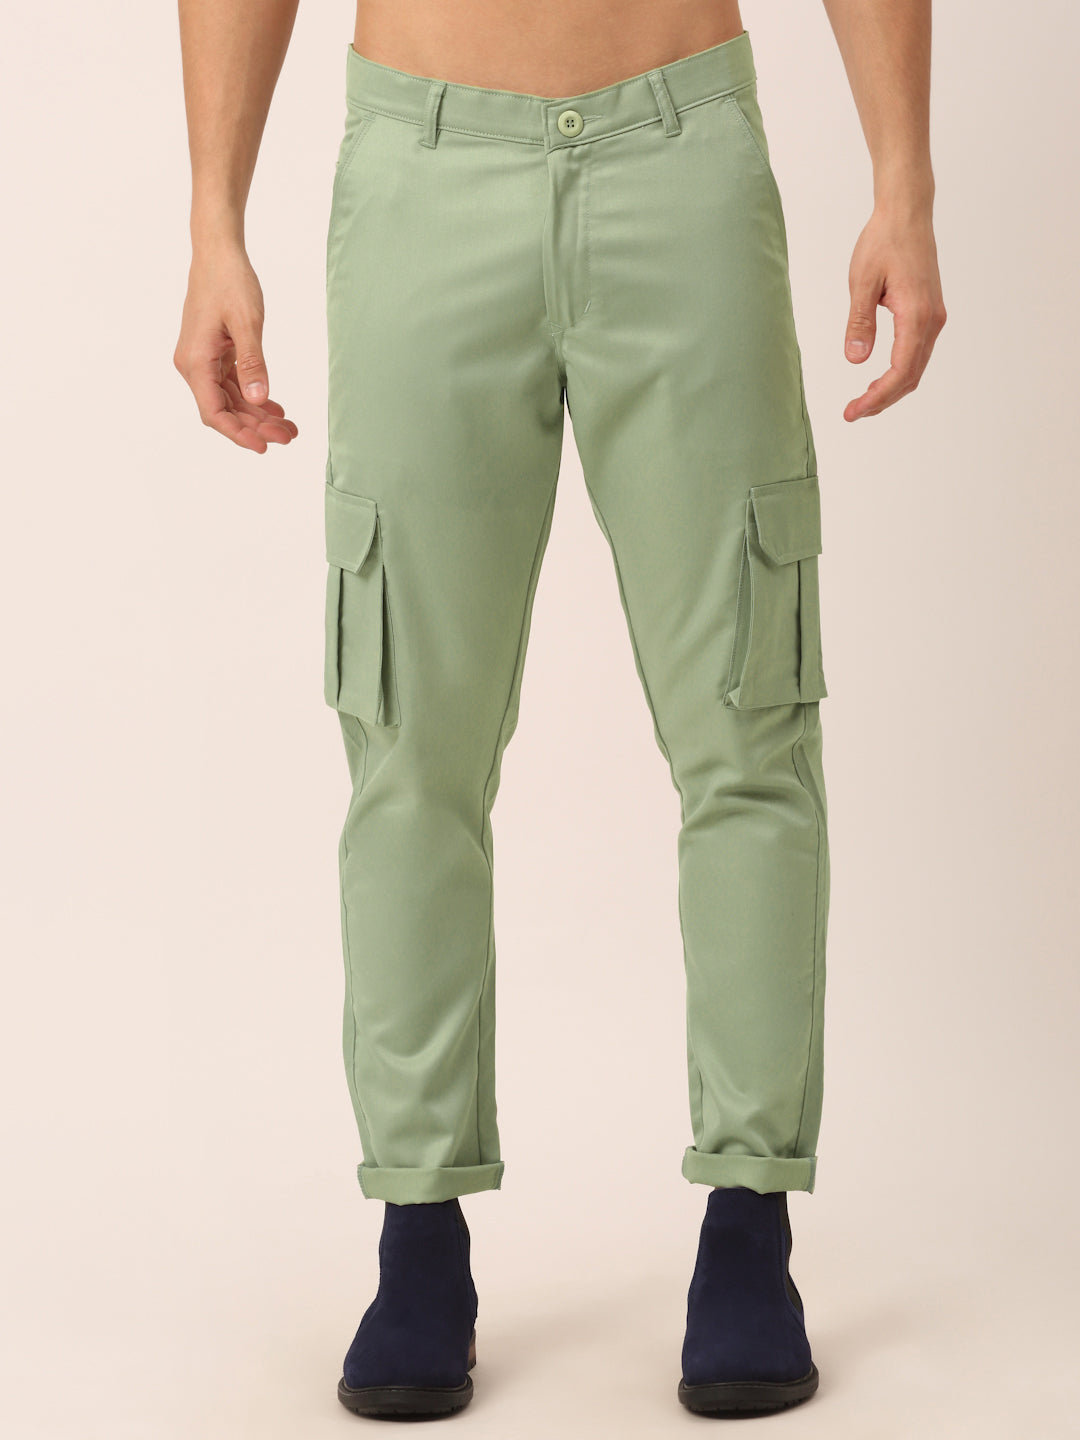 Chic Outfit Ideas for Green Shirt Matching Pant